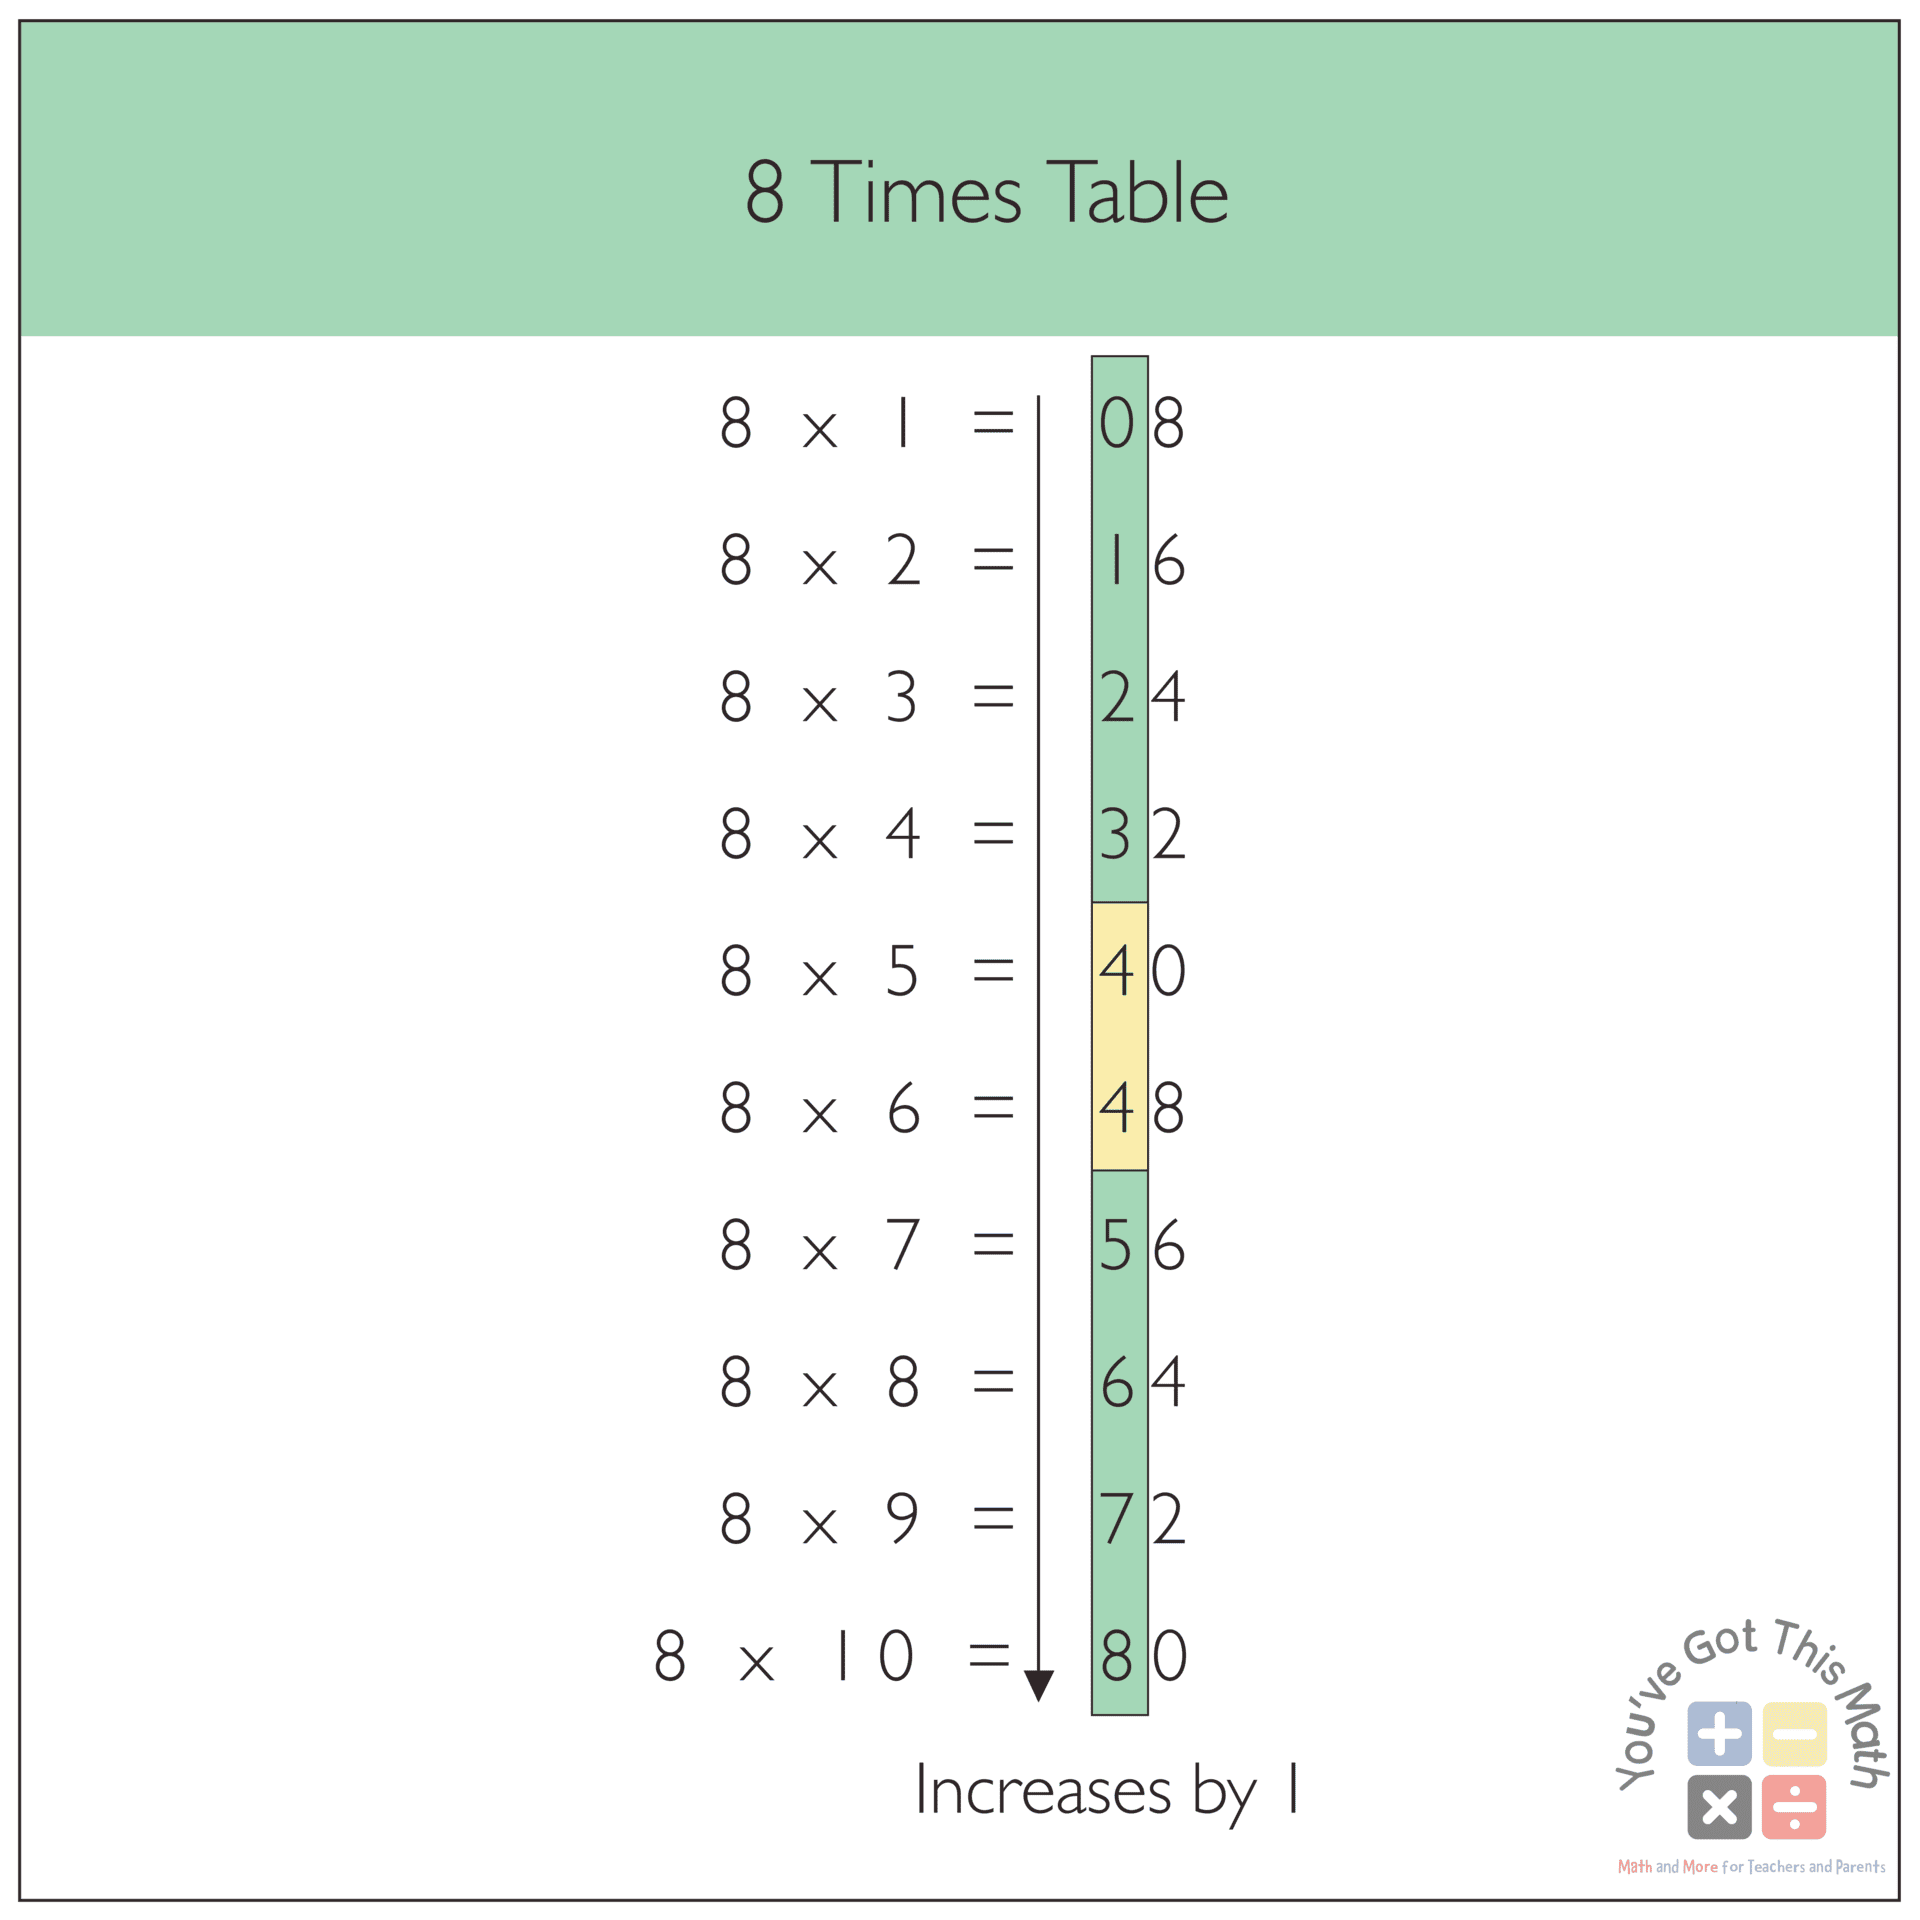 Showing The Sequence Of Numbers in 8 Times Table